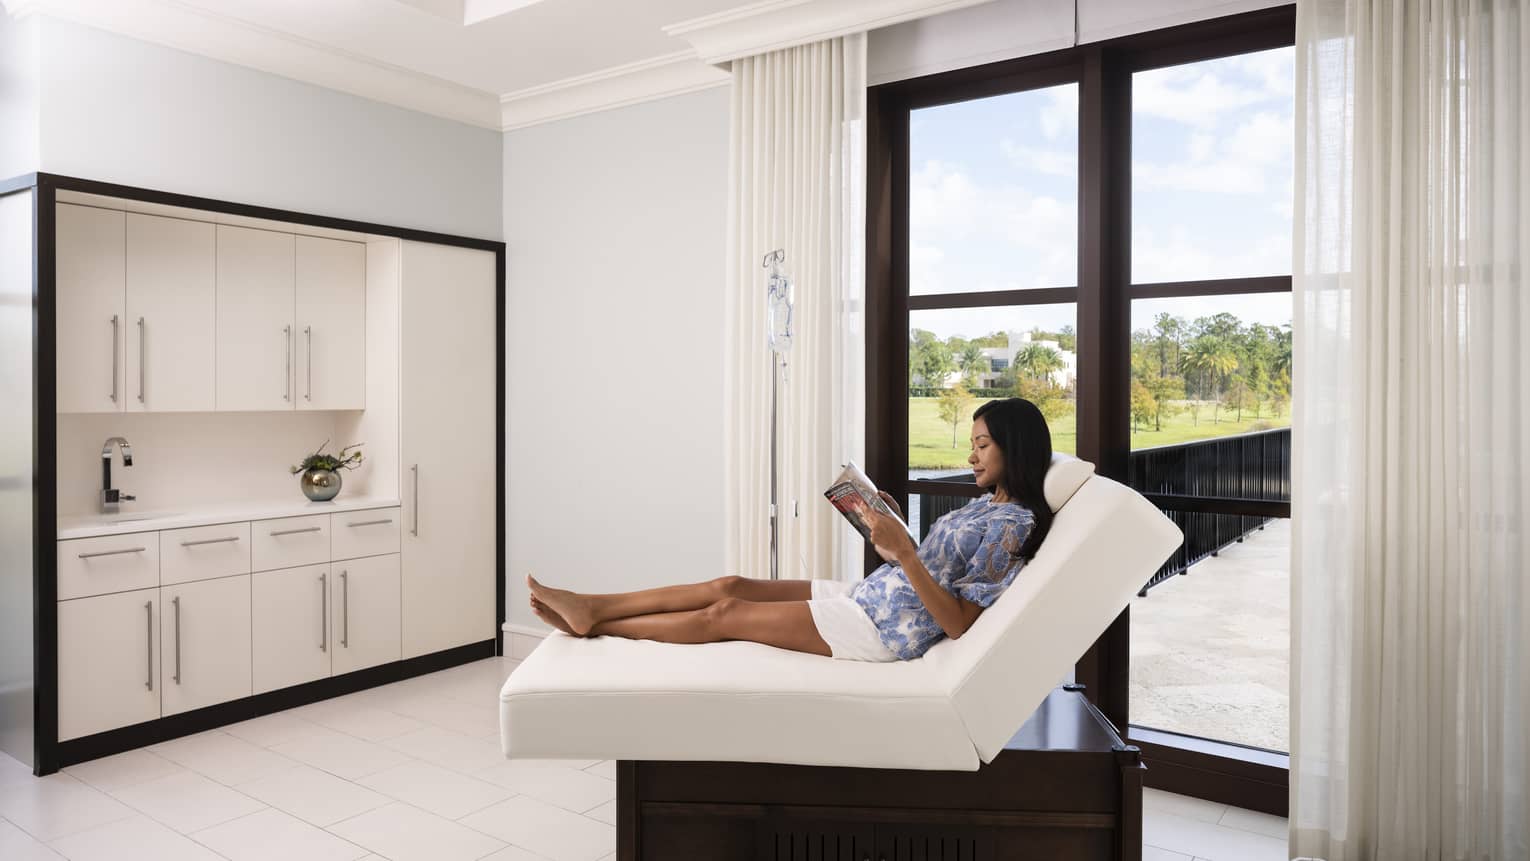 A woman reading a magazine on a folded mattress in a spa clinic with large window.